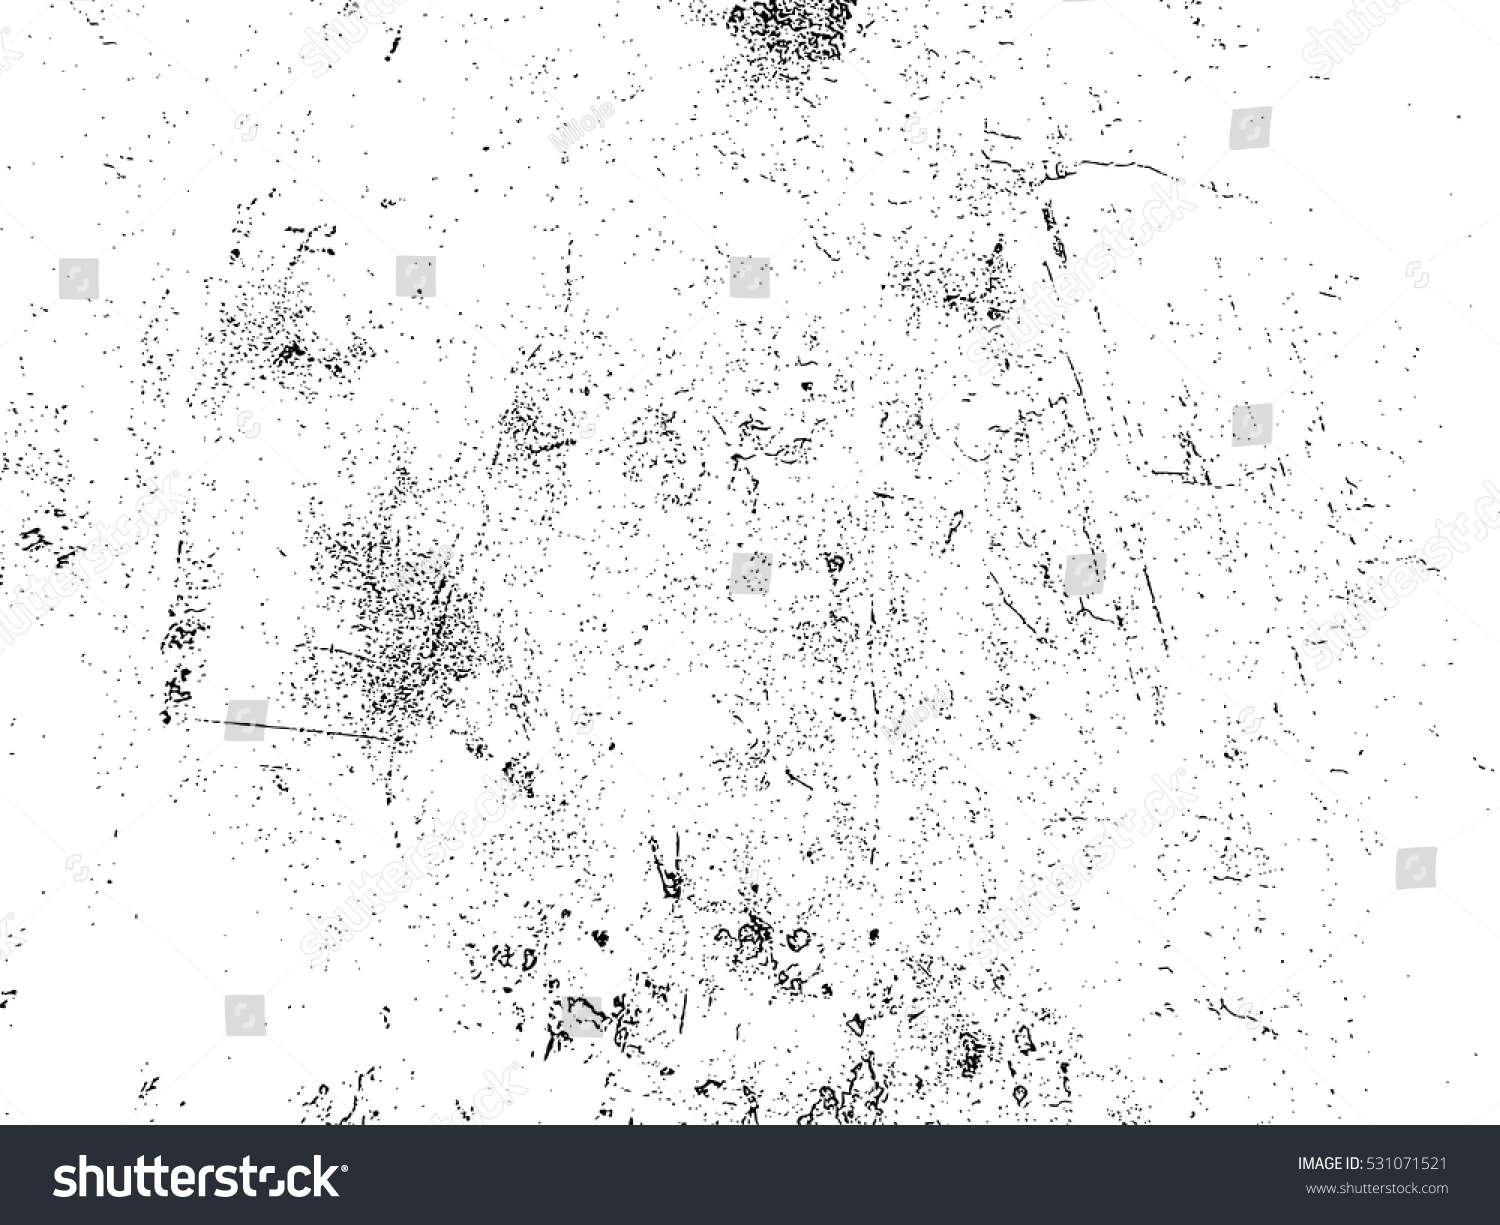 Scratch Grunge Urban Background.Texture Vector.Dust Overlay Distress Grain ,Simply Place illustration over any Object to Create grungy Effect .abstract,splattered , dirty,poster for your design. #531071521